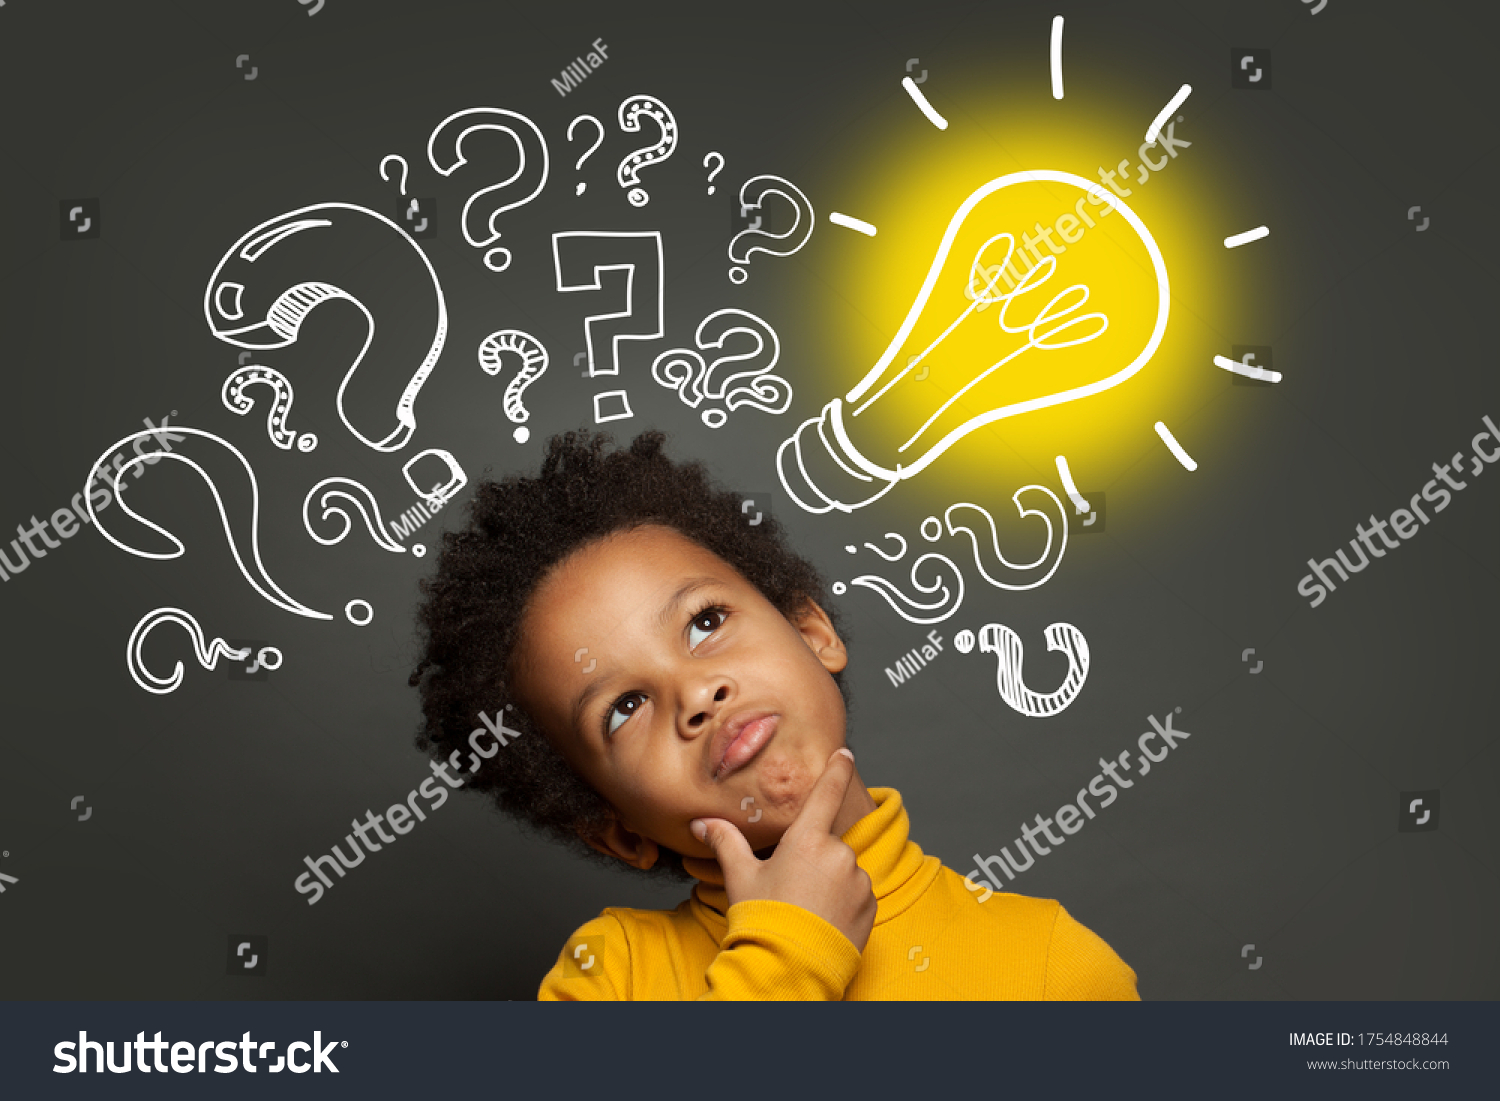 Thinking child boy on black background with light bulb and question marks. Brainstorming and idea concept #1754848844